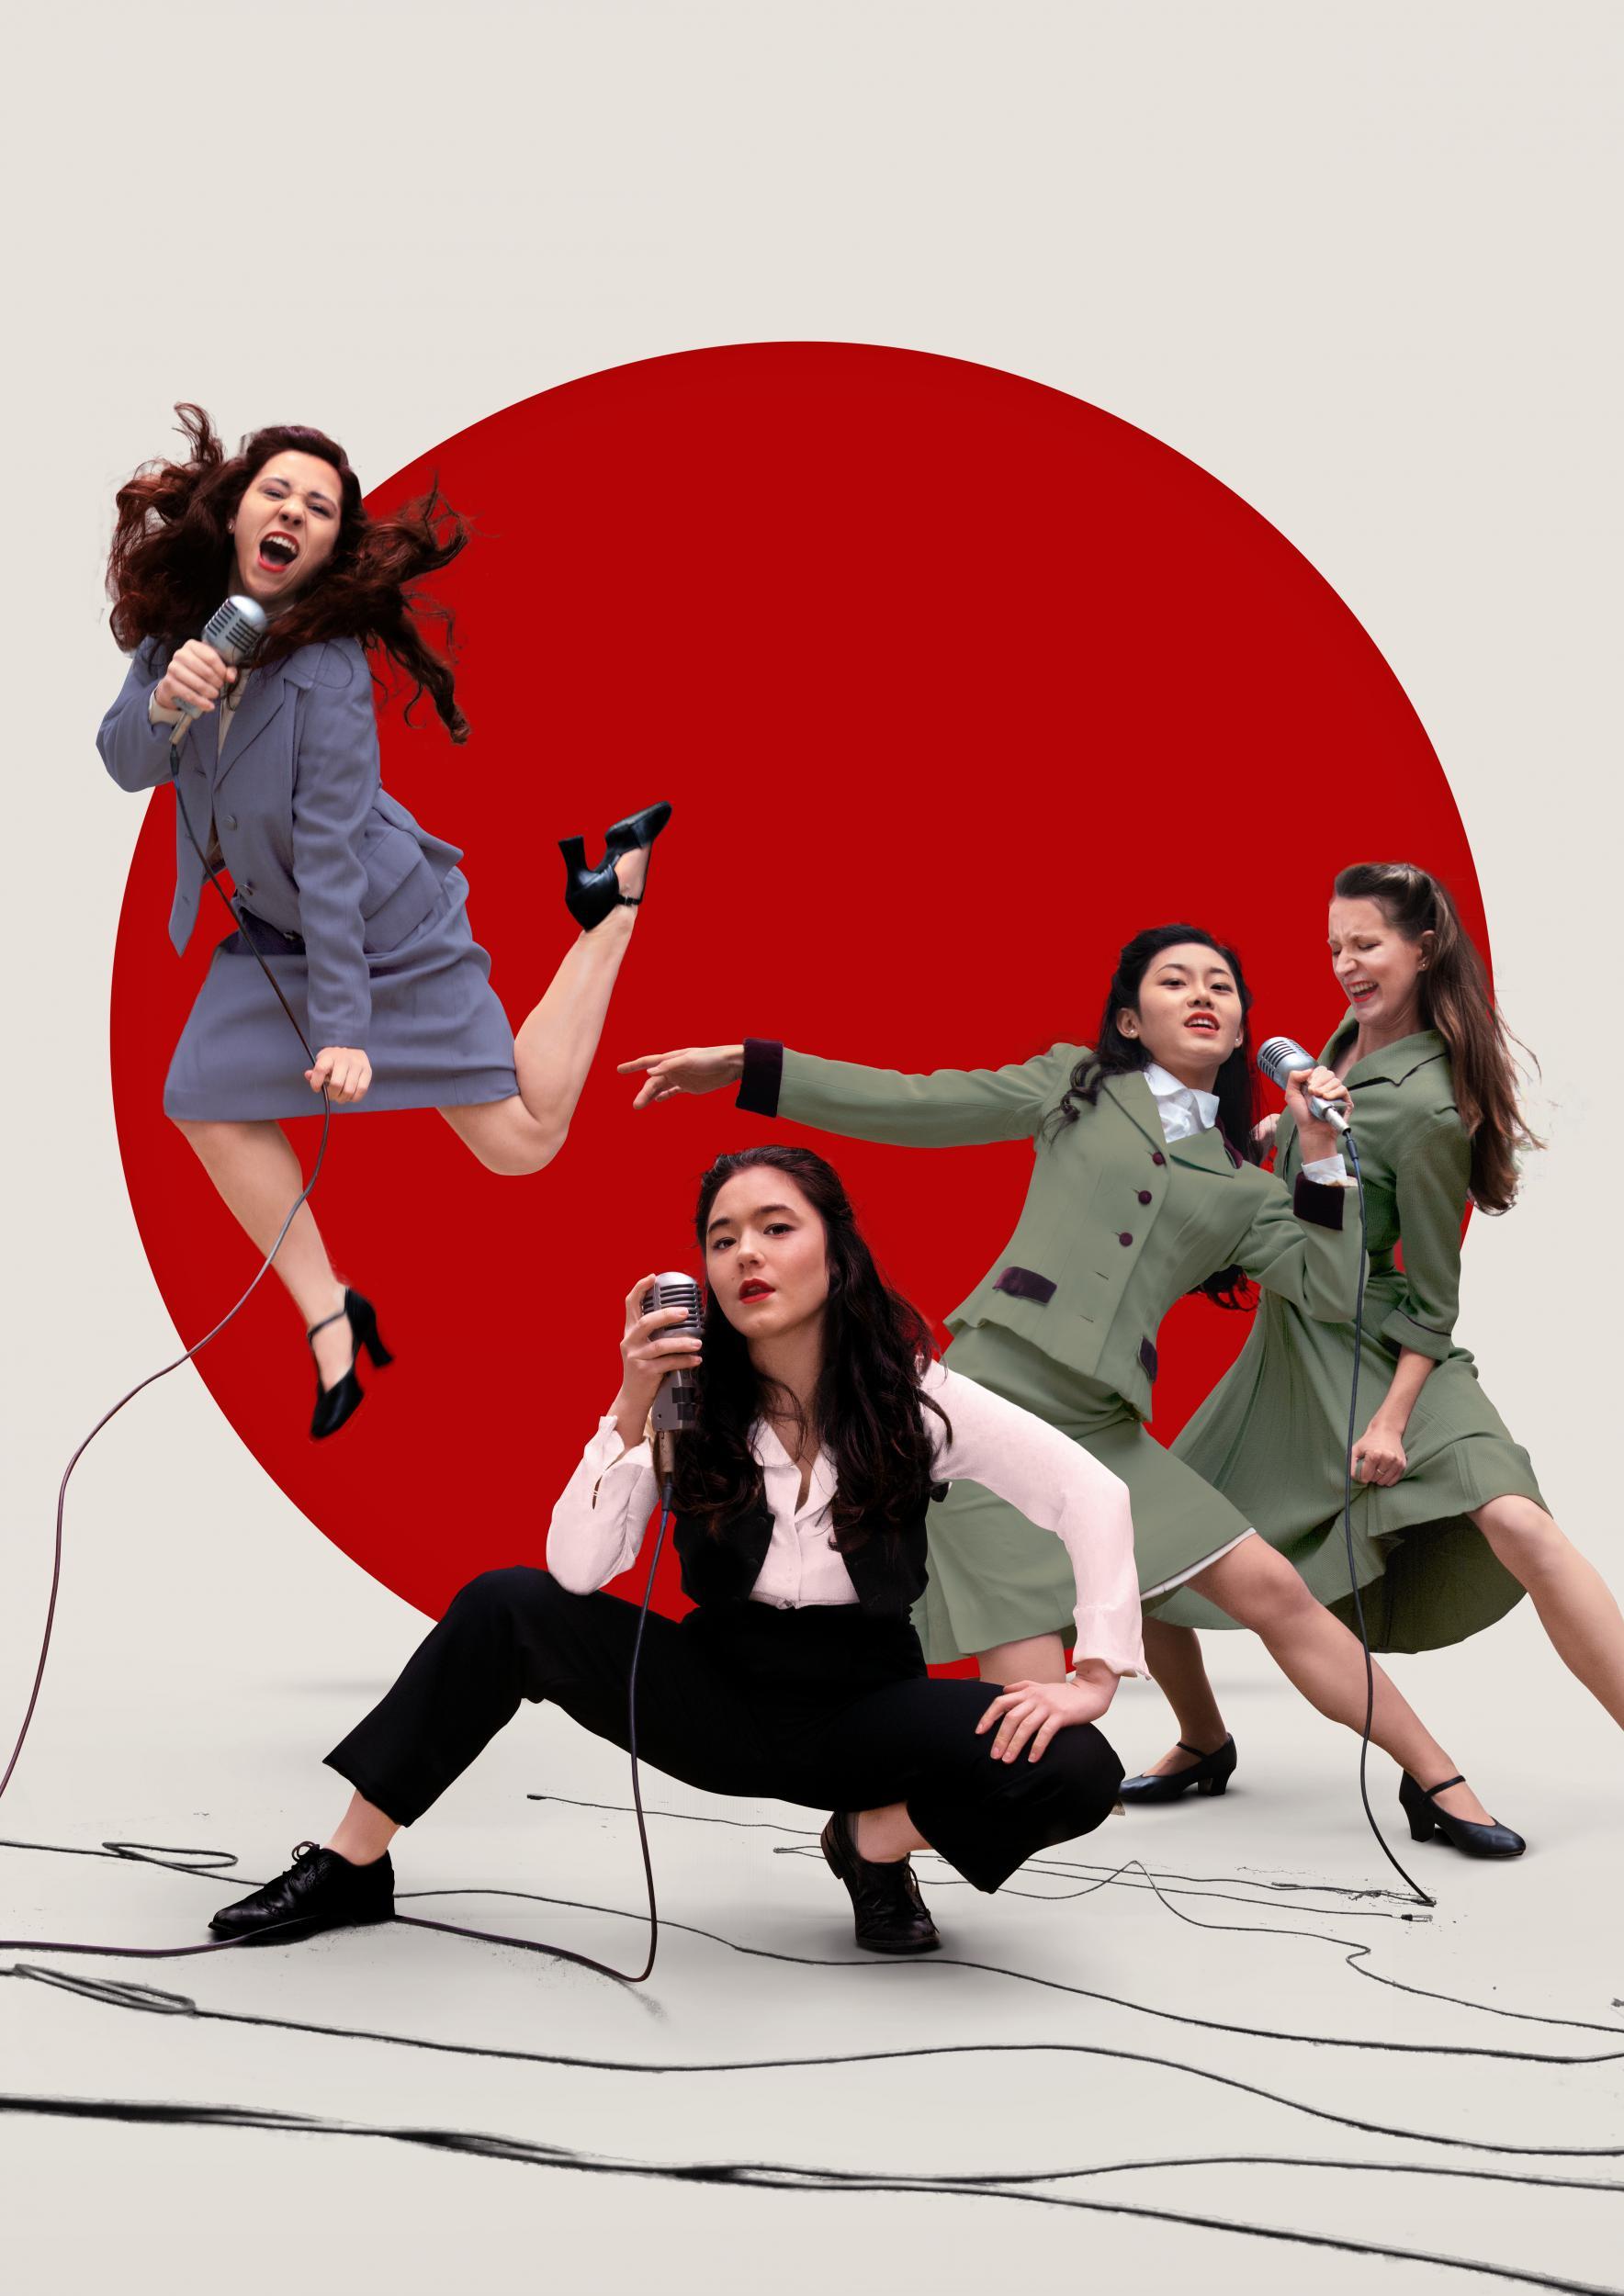 Burnt Lemon’s ‘Tokyo Rose’ is a rap-musical about a woman charged with treason for making anti-American propaganda in World War Two